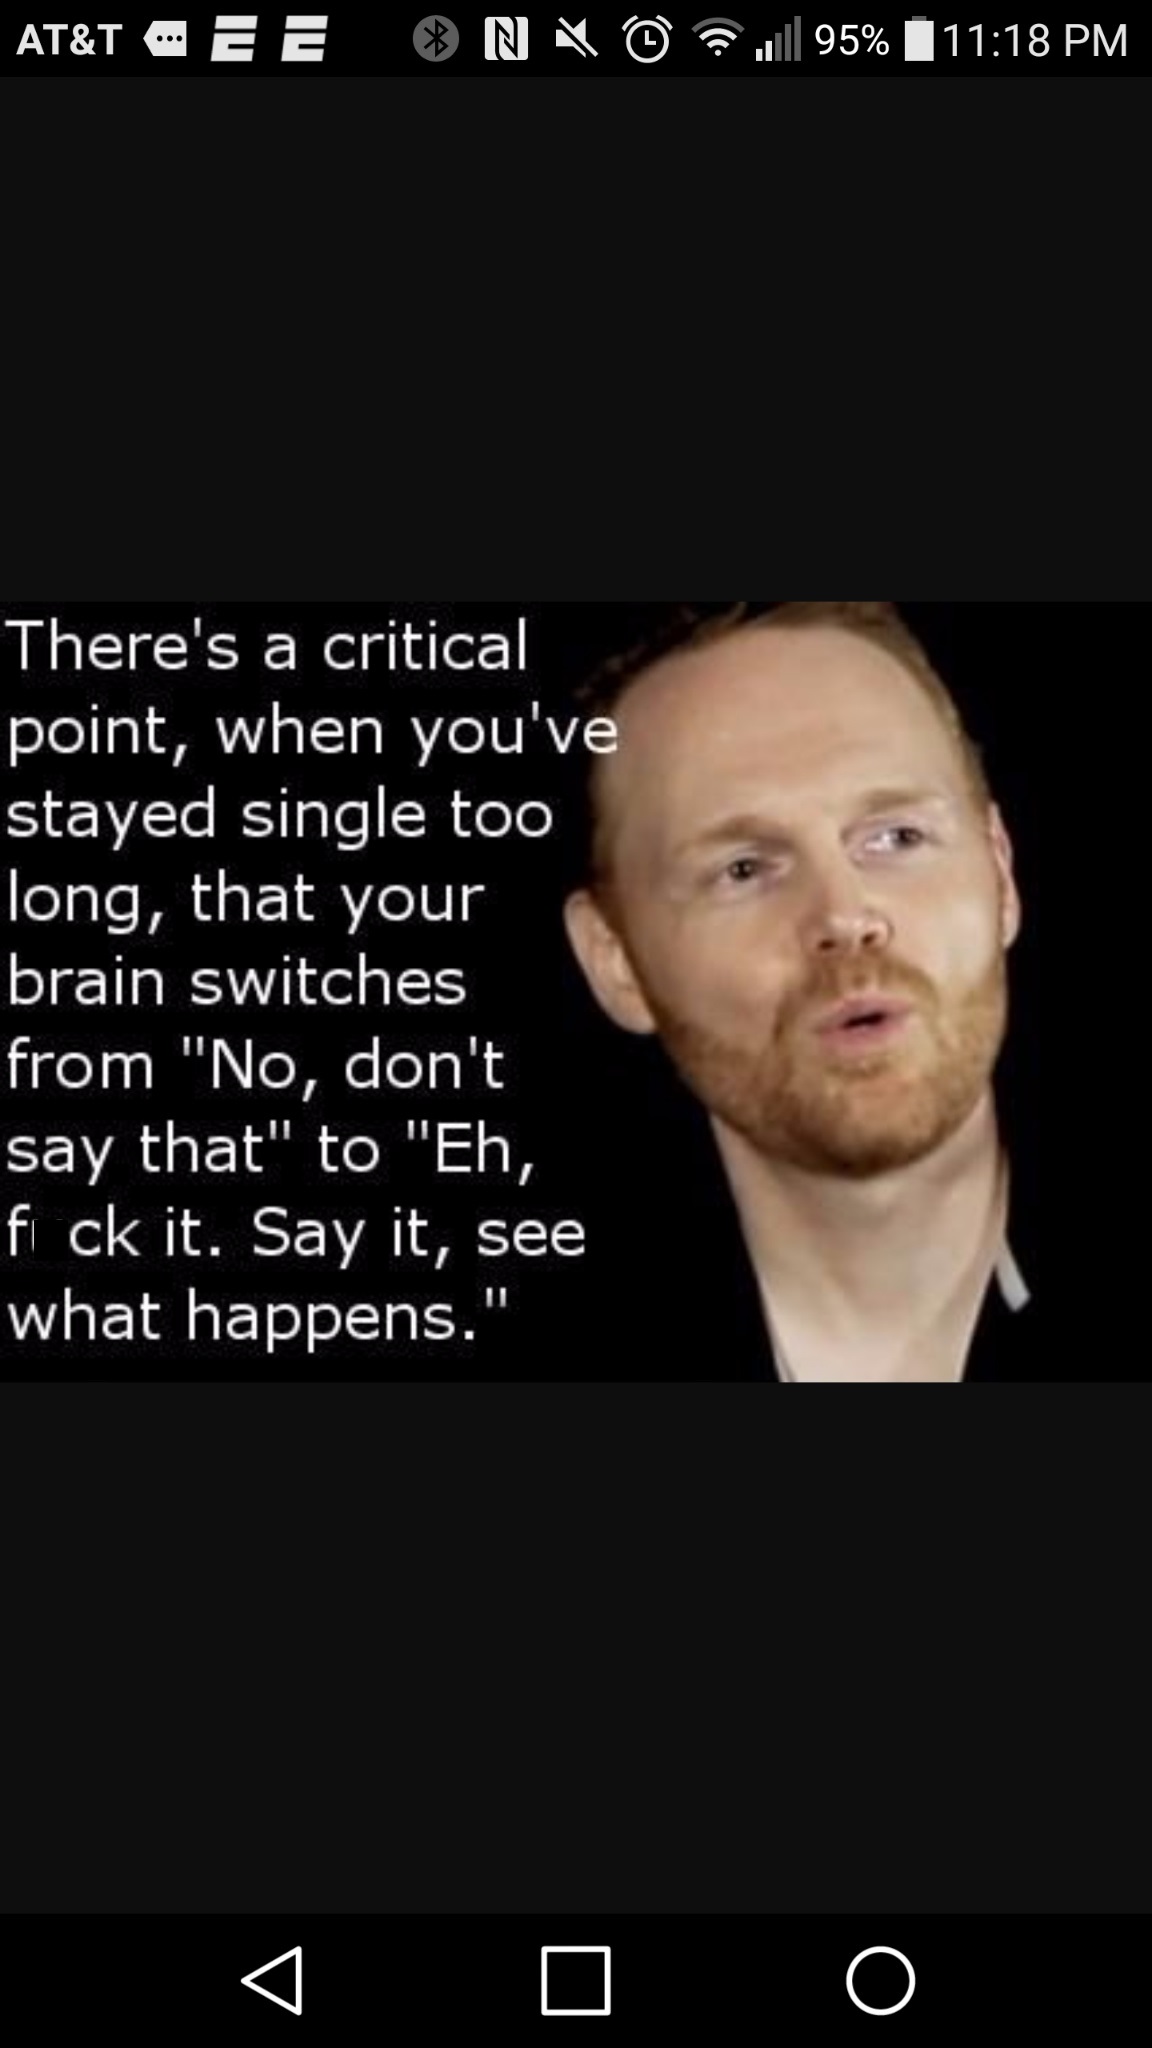 bill burr fuck it say - At&T Ee Ona ll 95% There's a critical point, when you've stayed single too long, that your brain switches from "No, don't say that" to "Eh, fi ck it. Say it, see what happens."